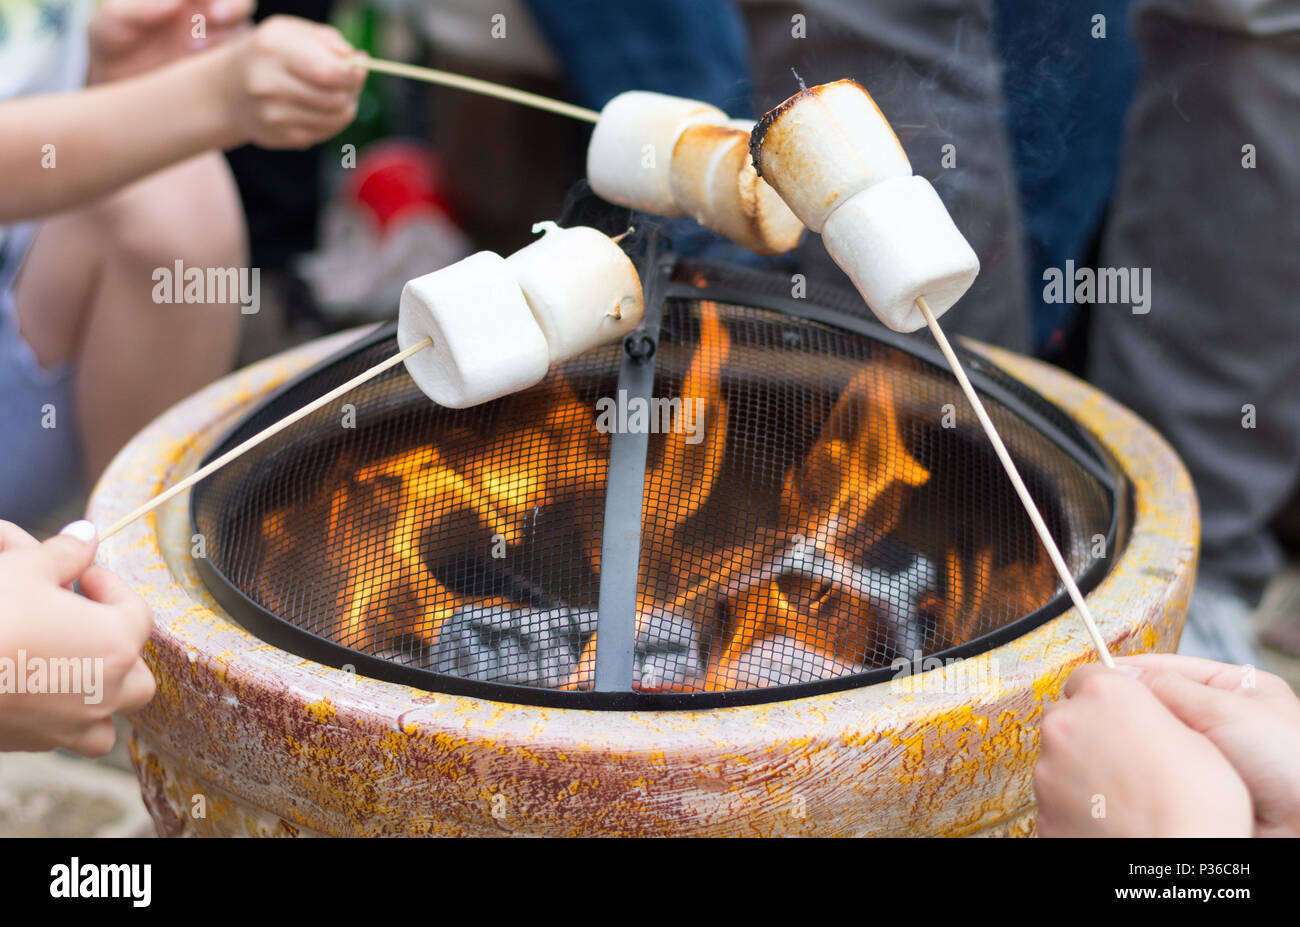 People toasting marshmellows sur open fire pit at garden party Banque D'Images